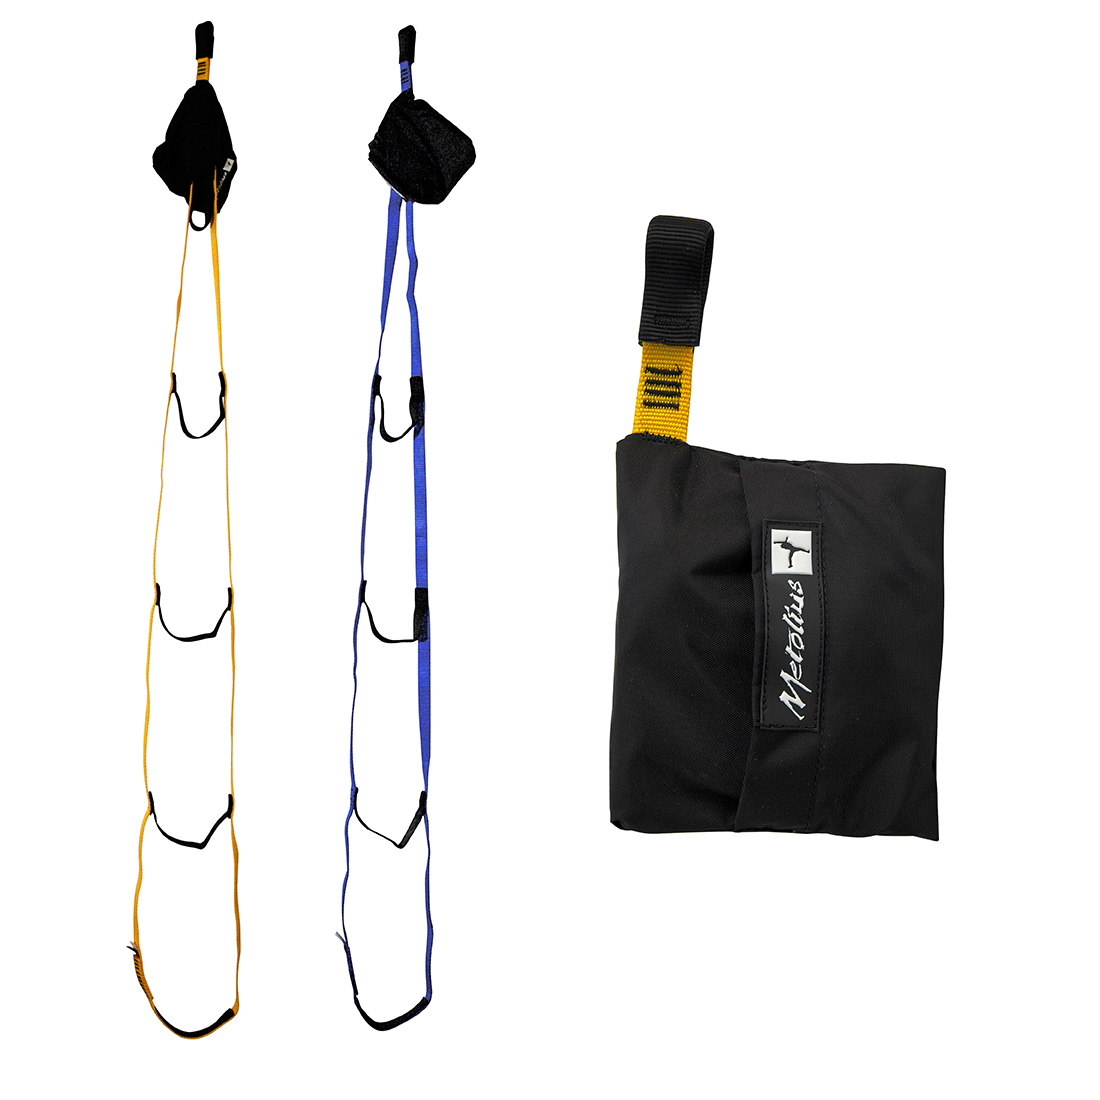 Pocket Aider by Metolius